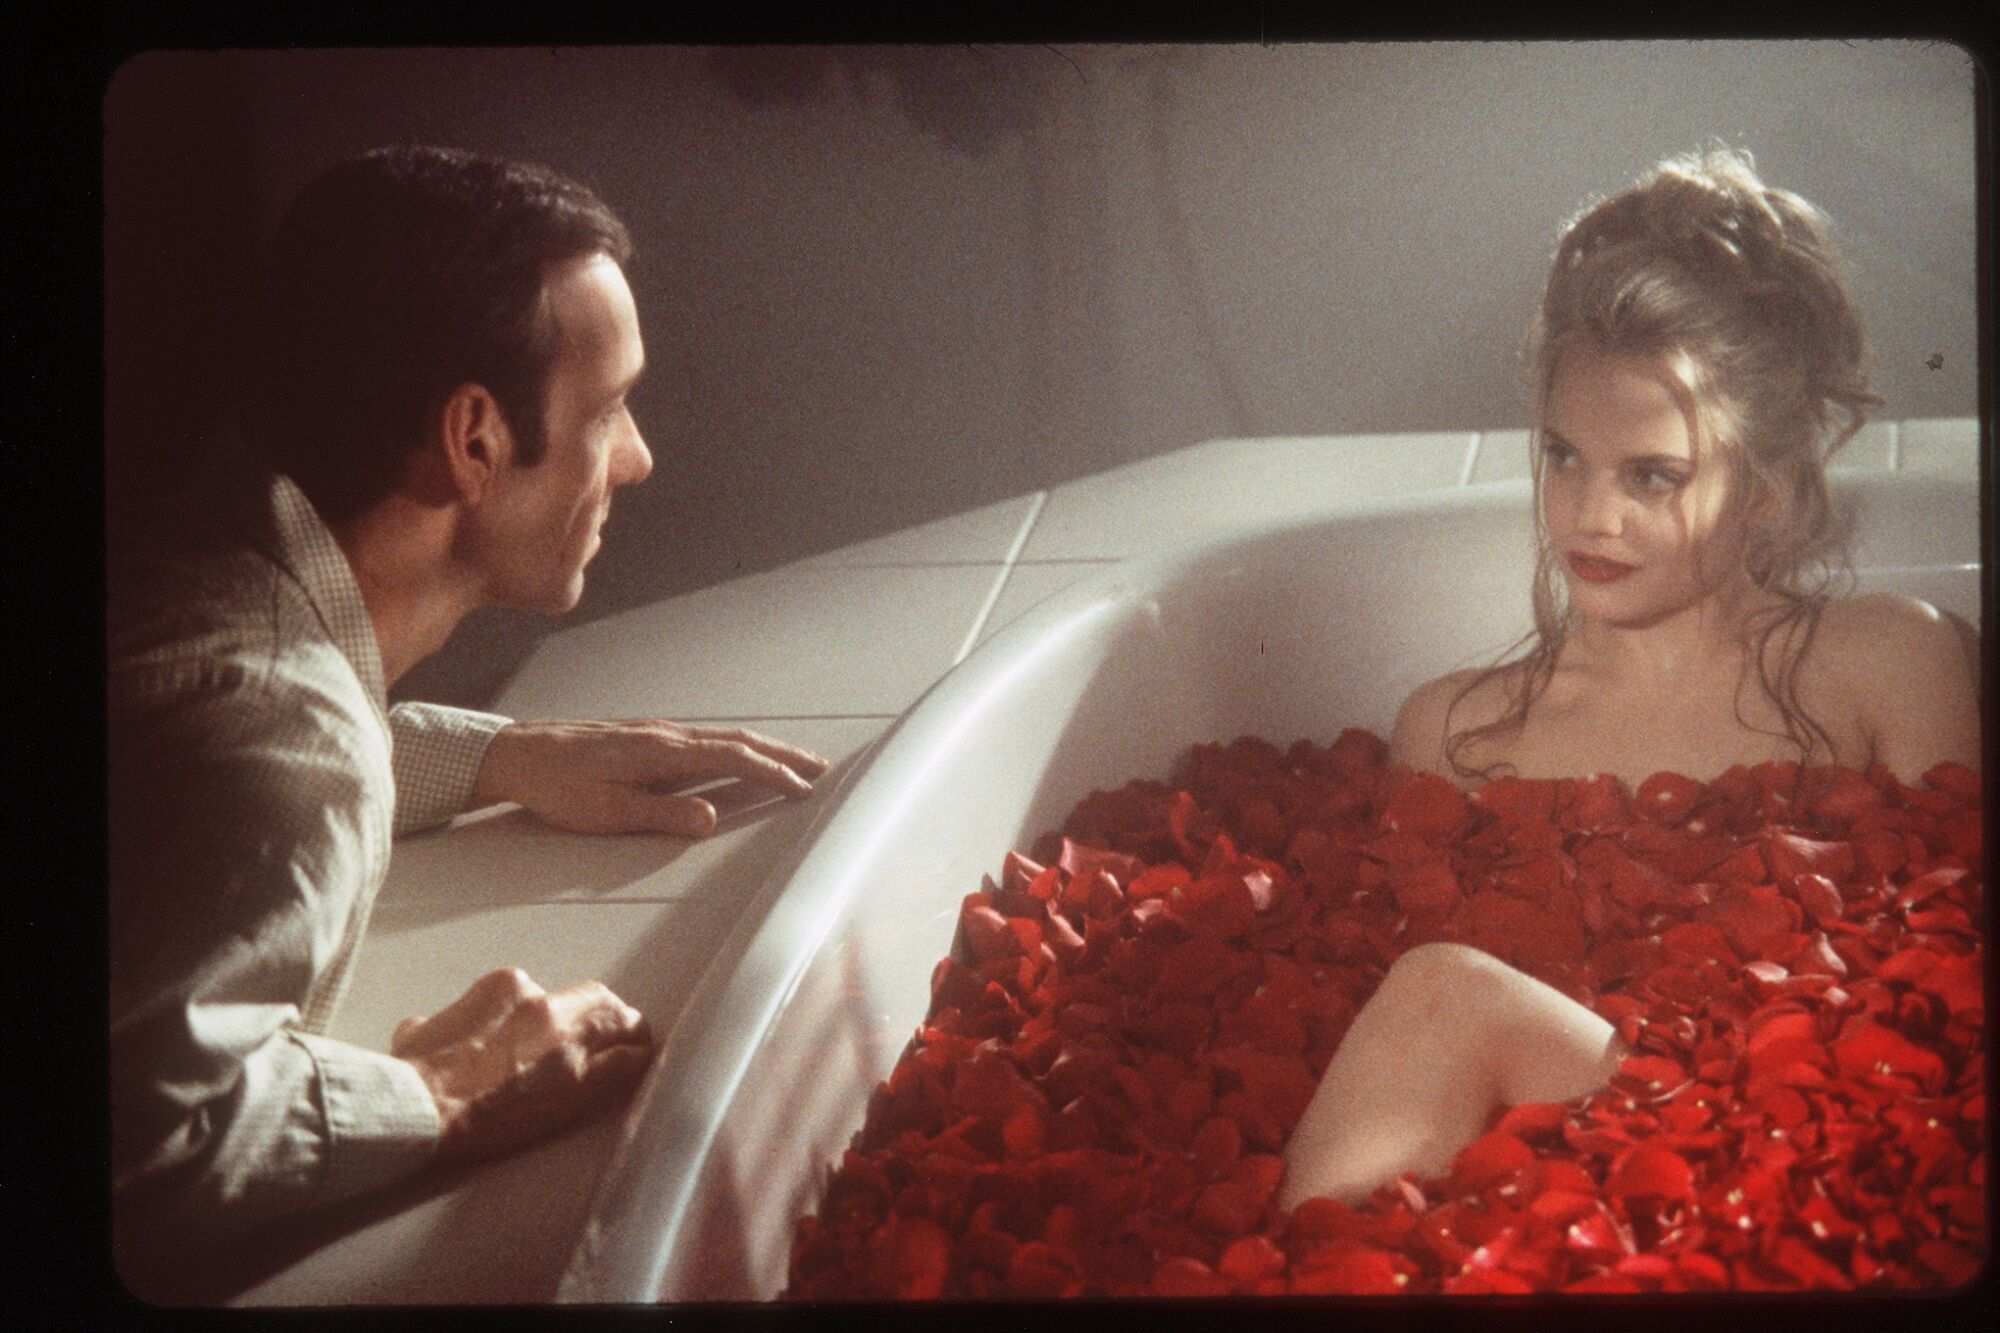 Kevin Spacey looks at Mena Suvari, in a tub full of roses, in "American Beauty."